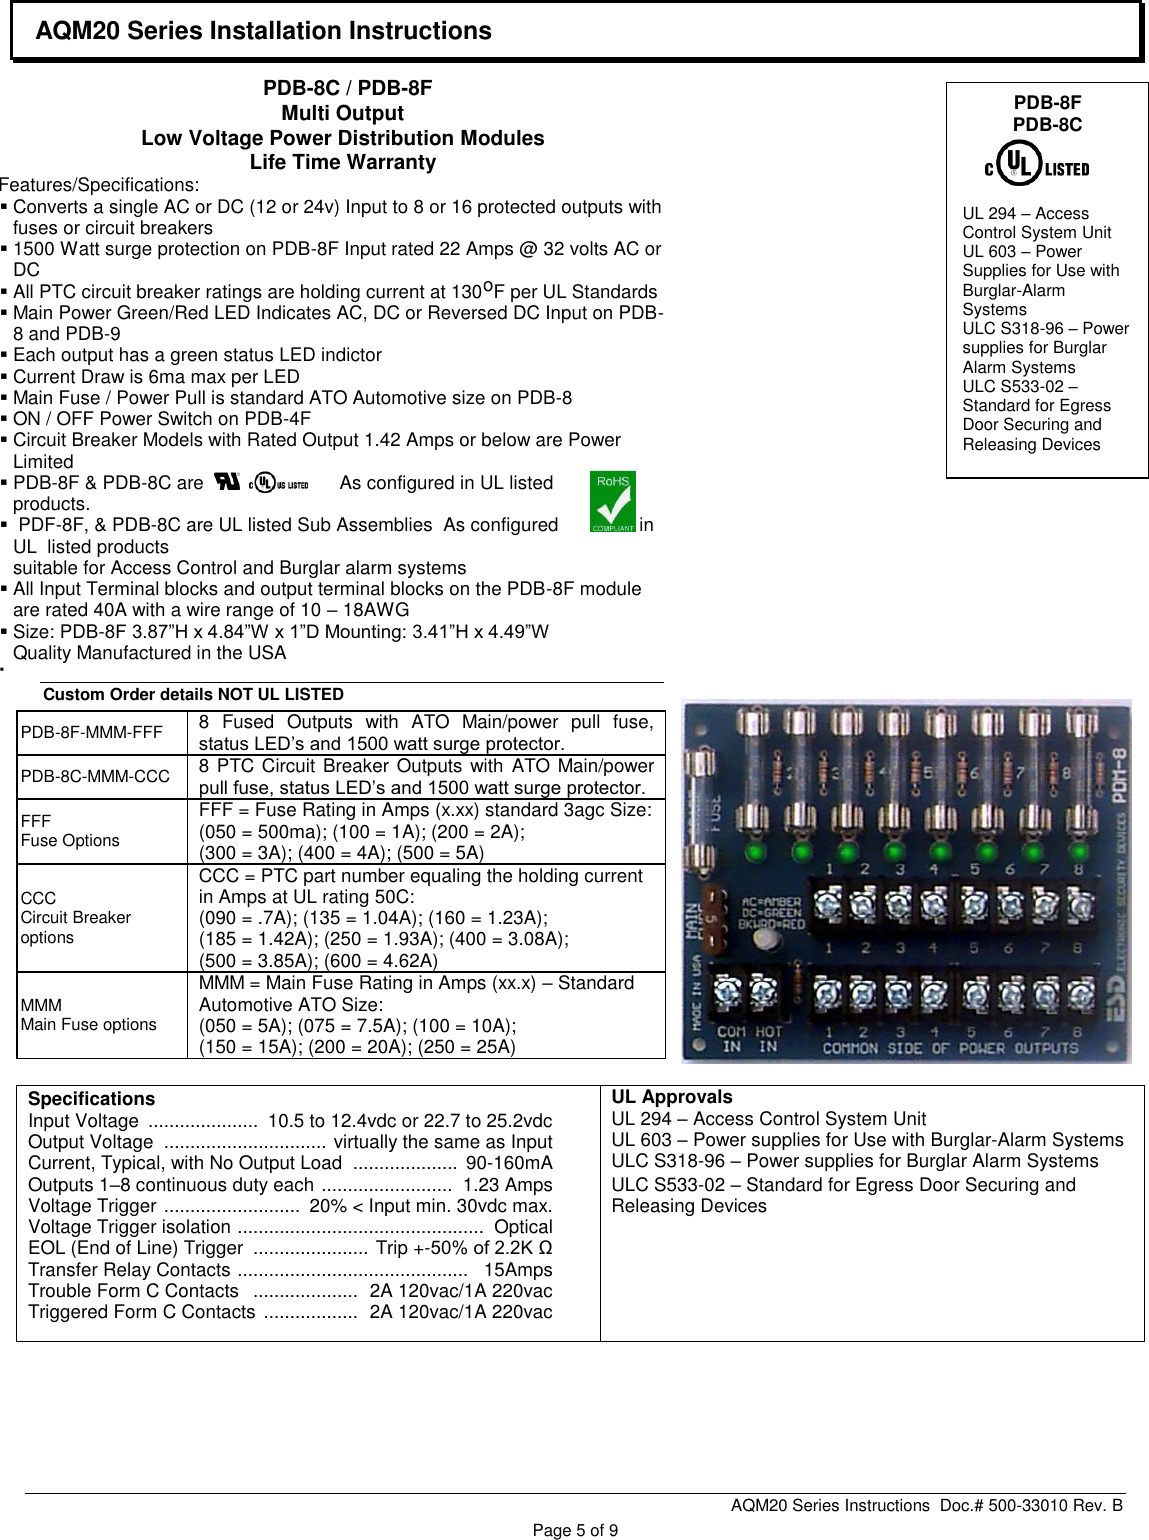 Page 5 of 8 - Securitron SPS-5 And SPS-10 Technical Sales Bulletin AQM-20 Installation Manual I 500-33010 B